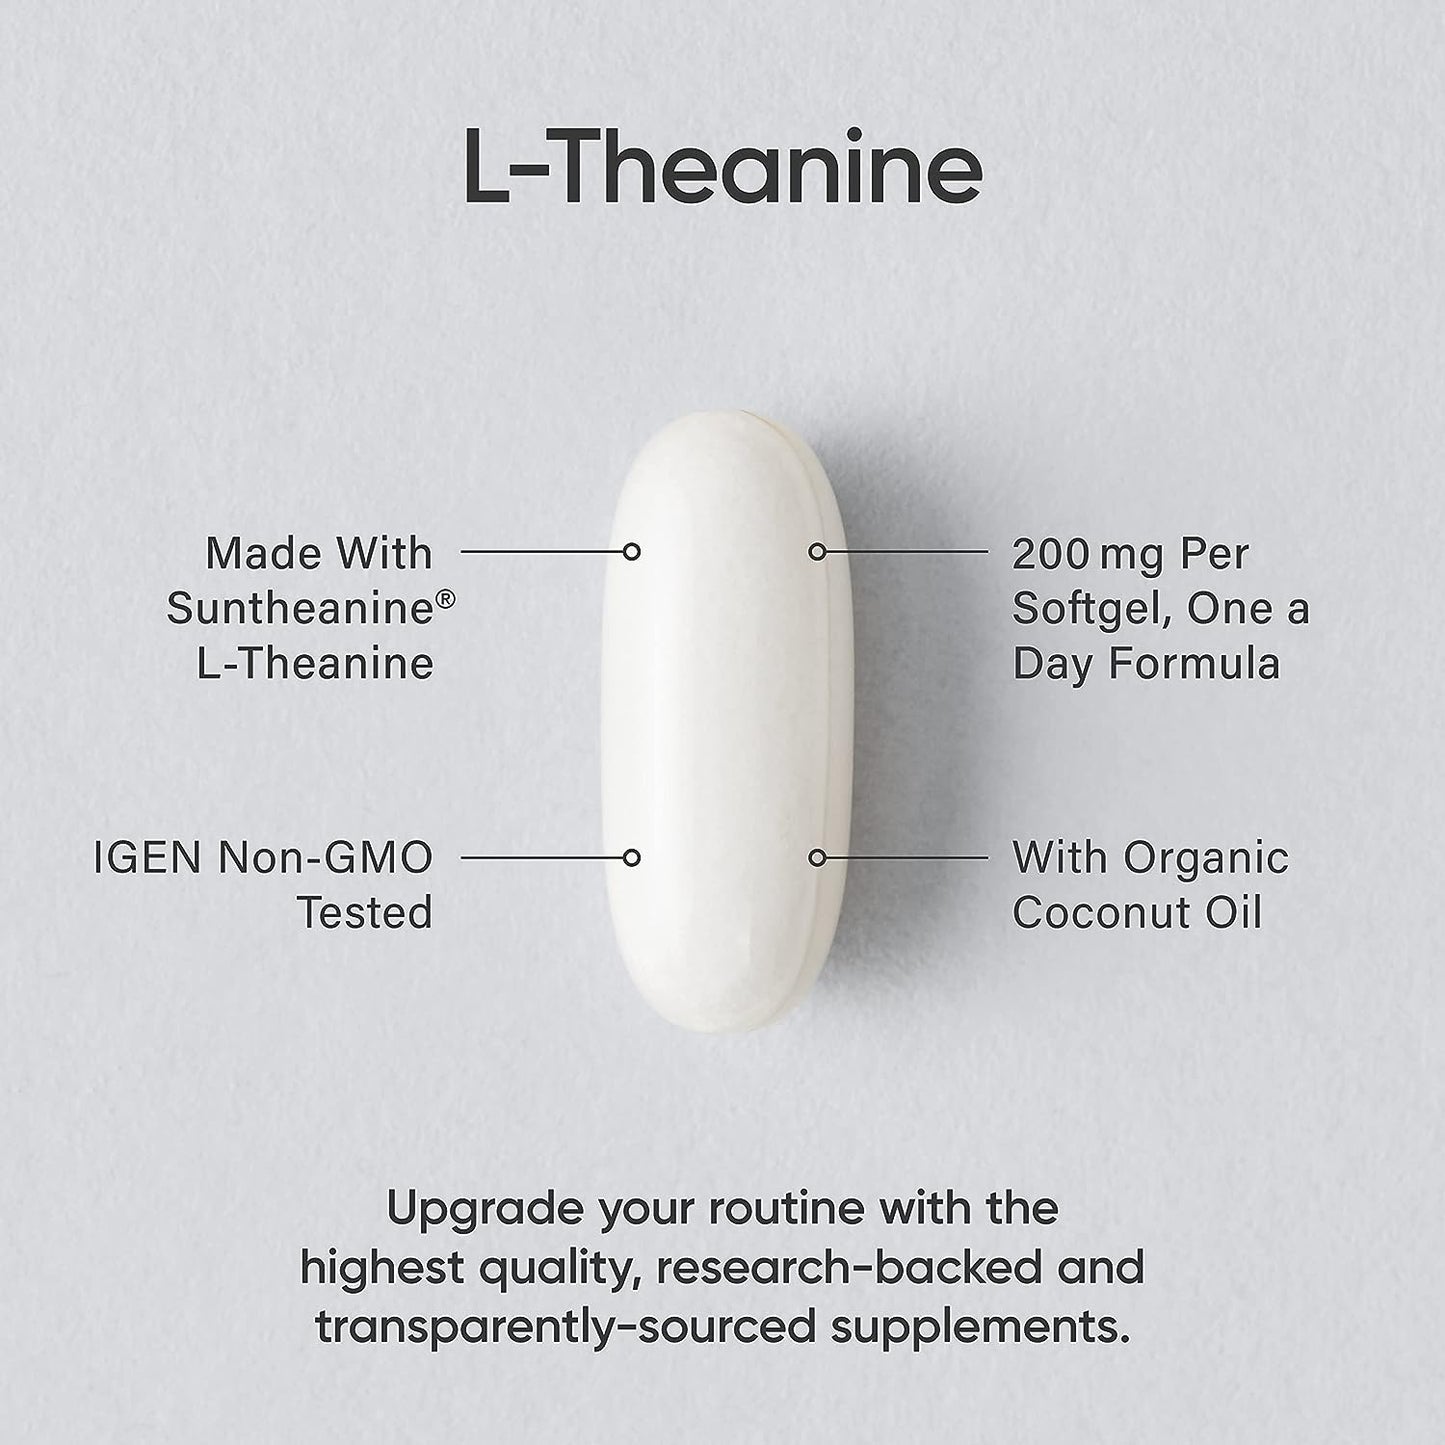 Sports Research L-Theanine with Coconut Oil